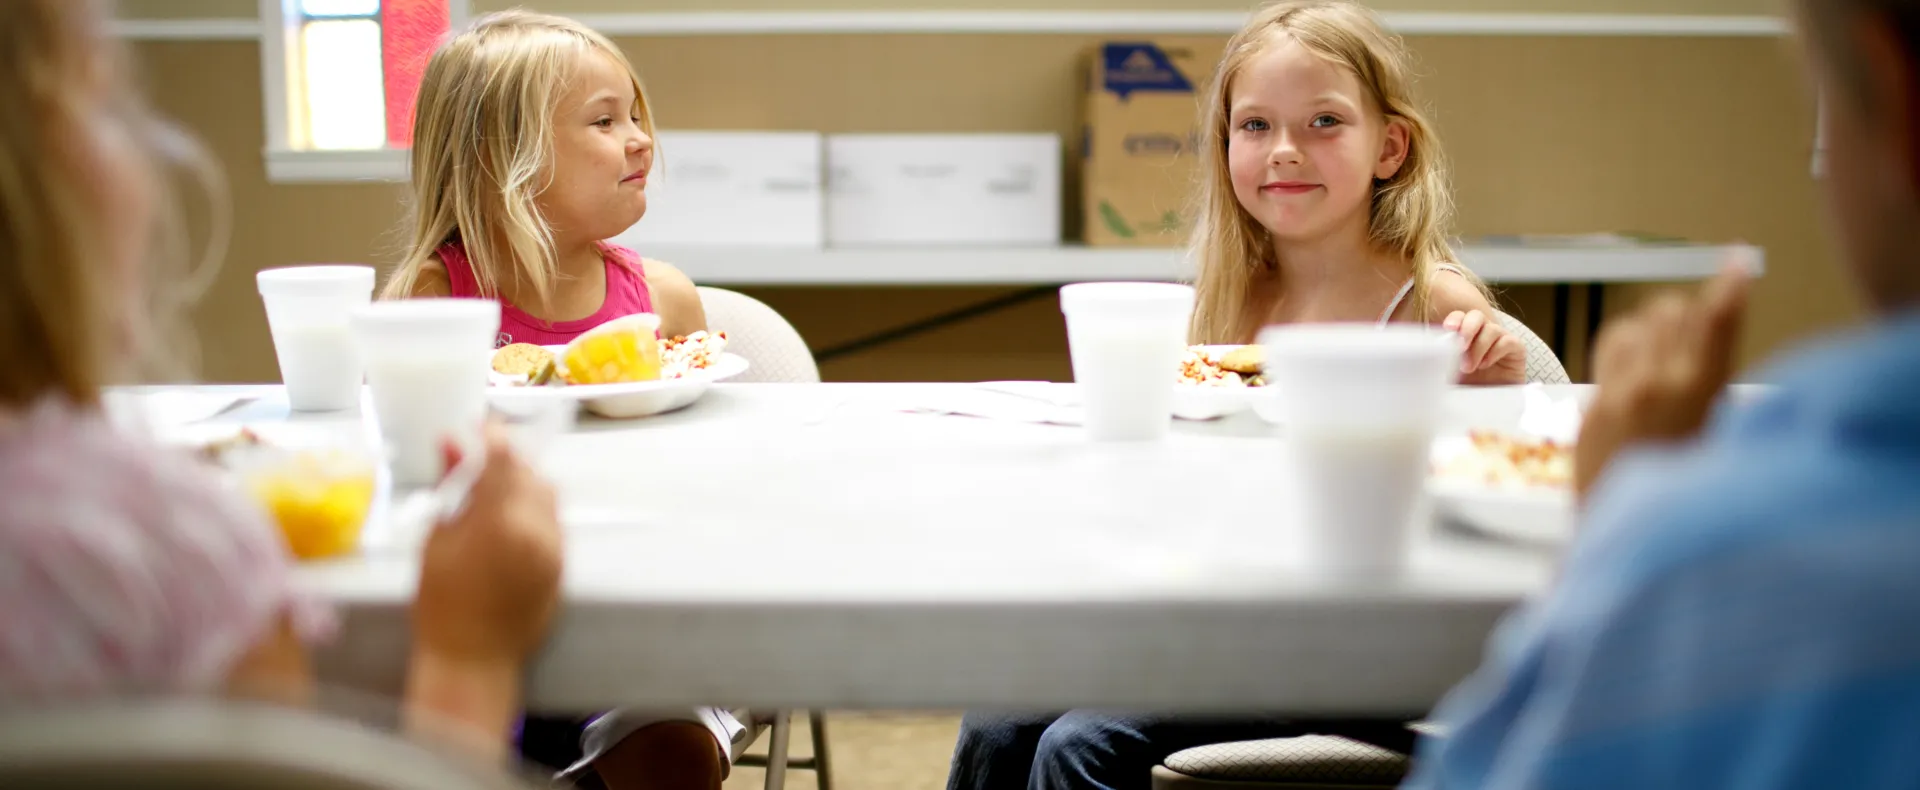 Two girls sitting at a fold out table eating and smiling